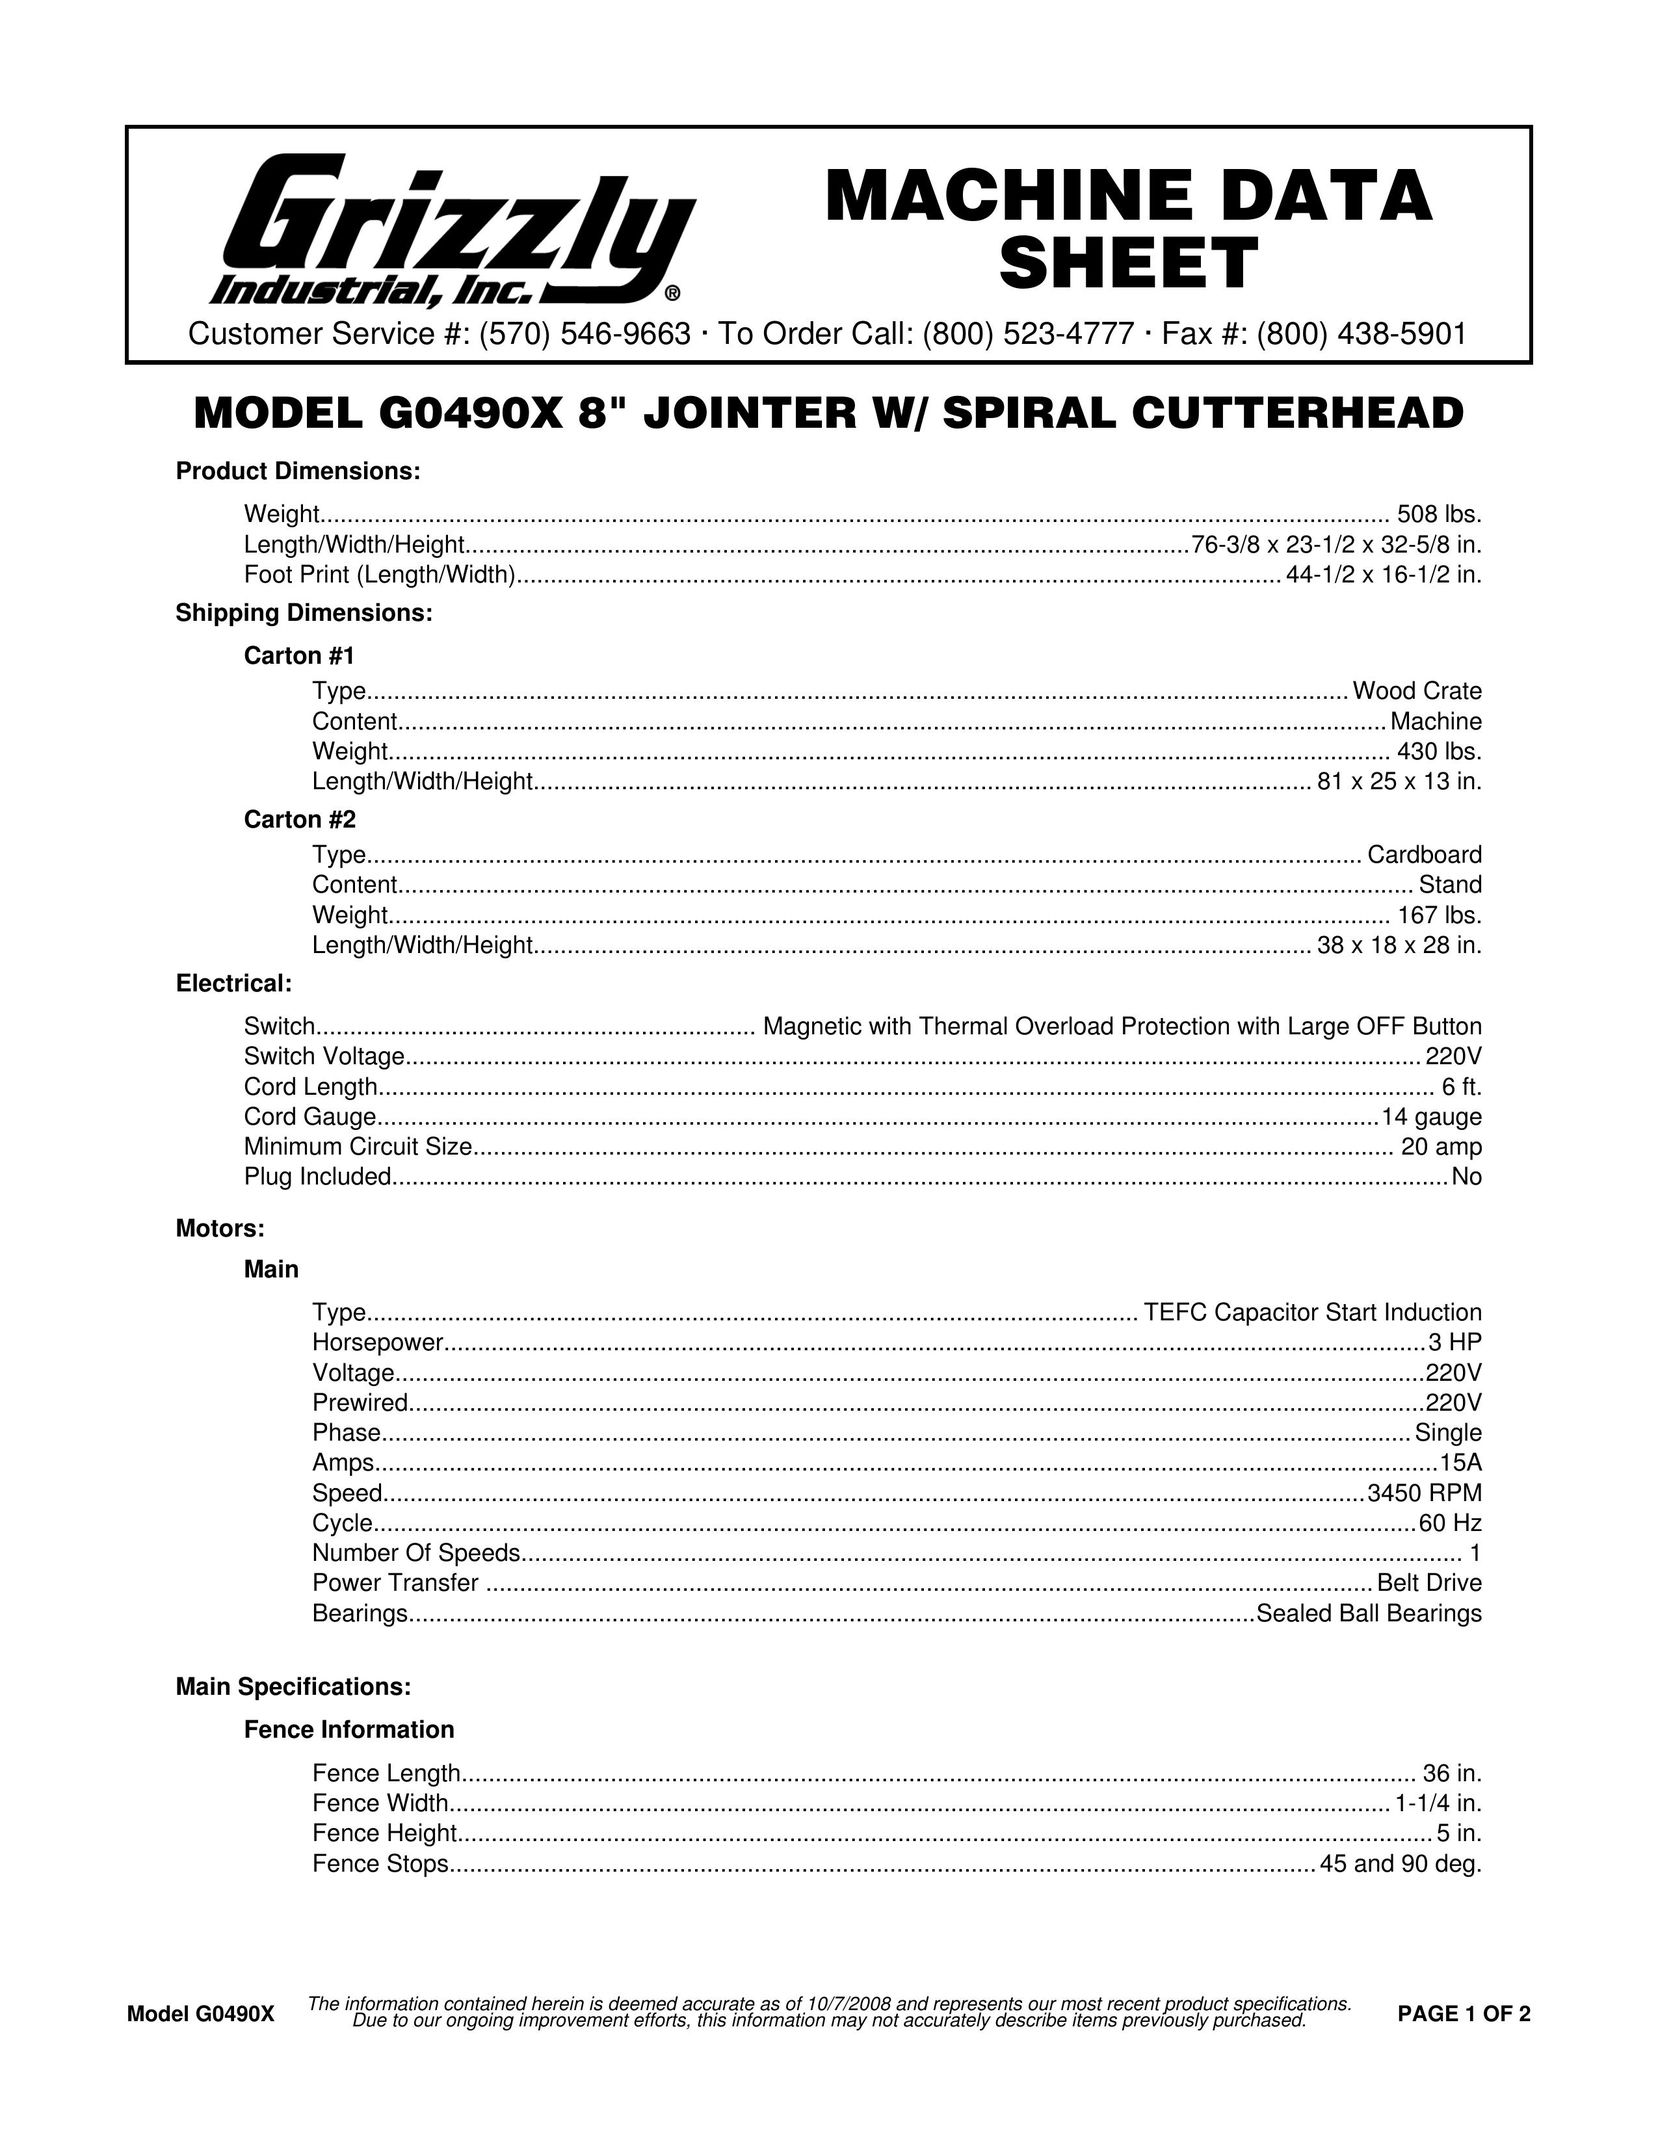 Grizzly G0490X Biscuit Joiner User Manual